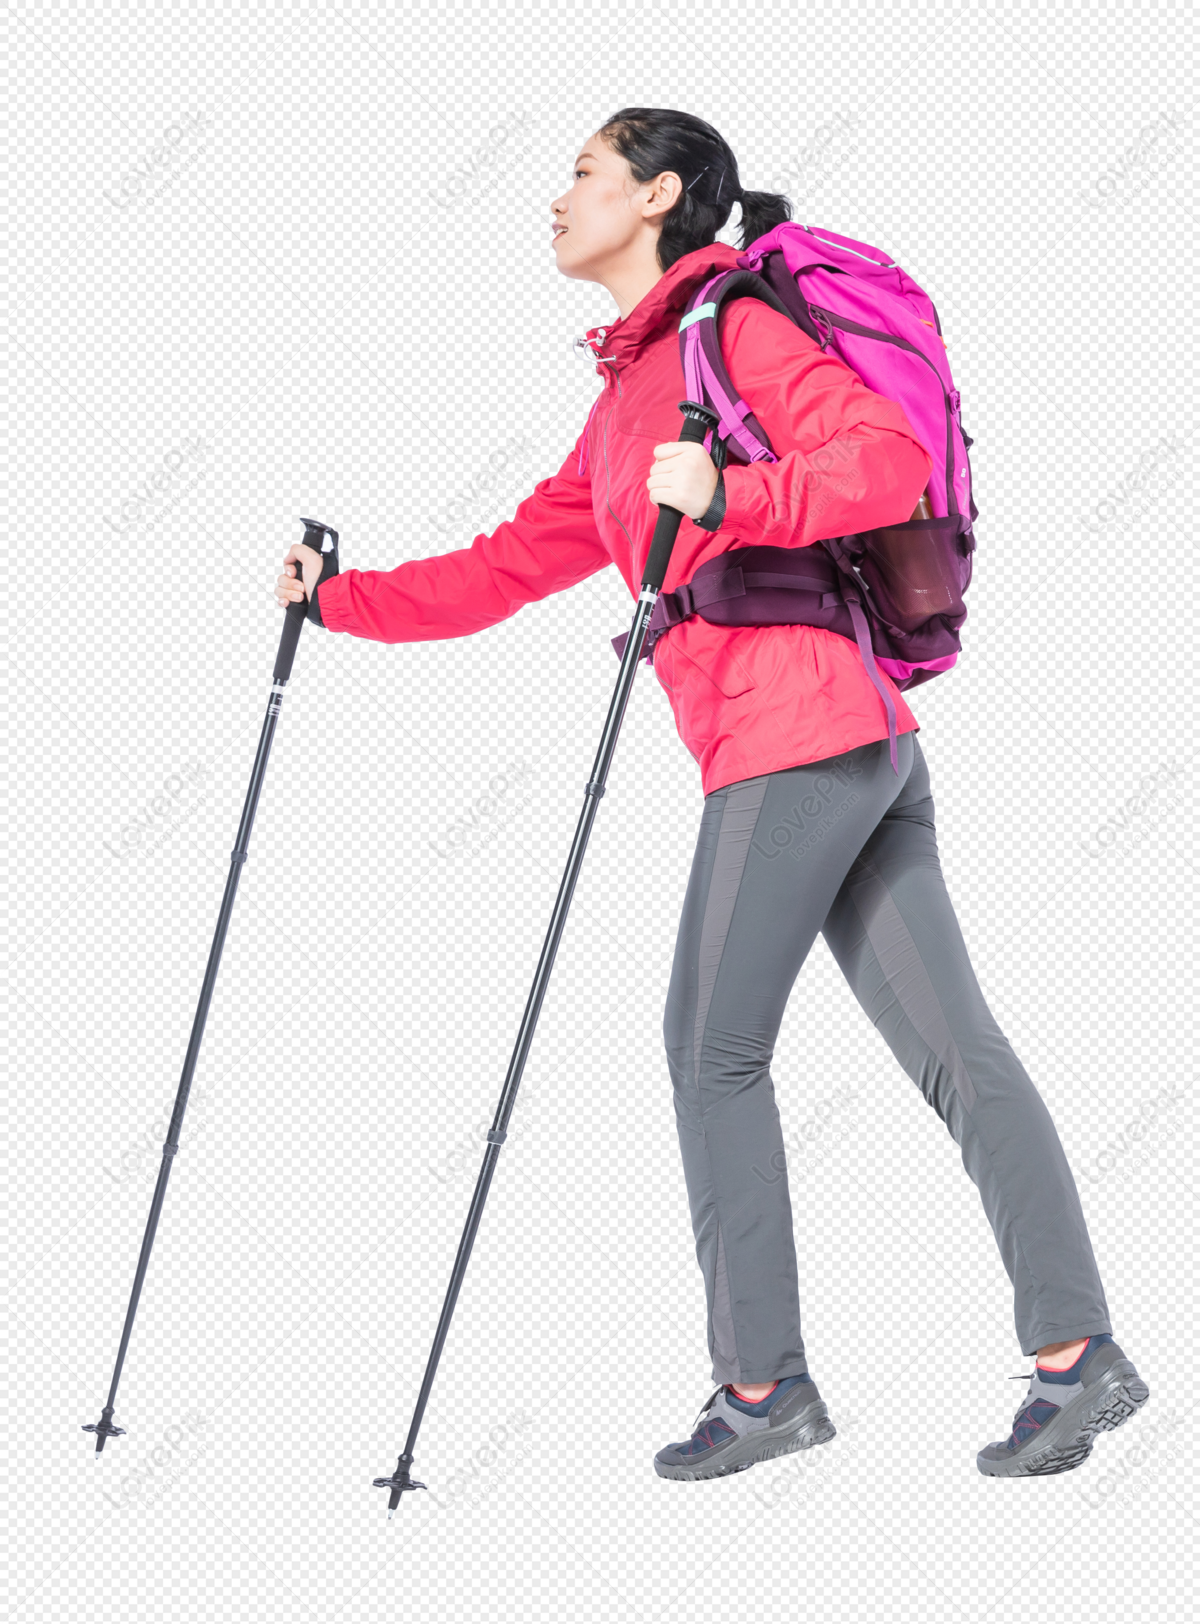 Hiking Young Women PNG Picture And Clipart Image For Free Download ...